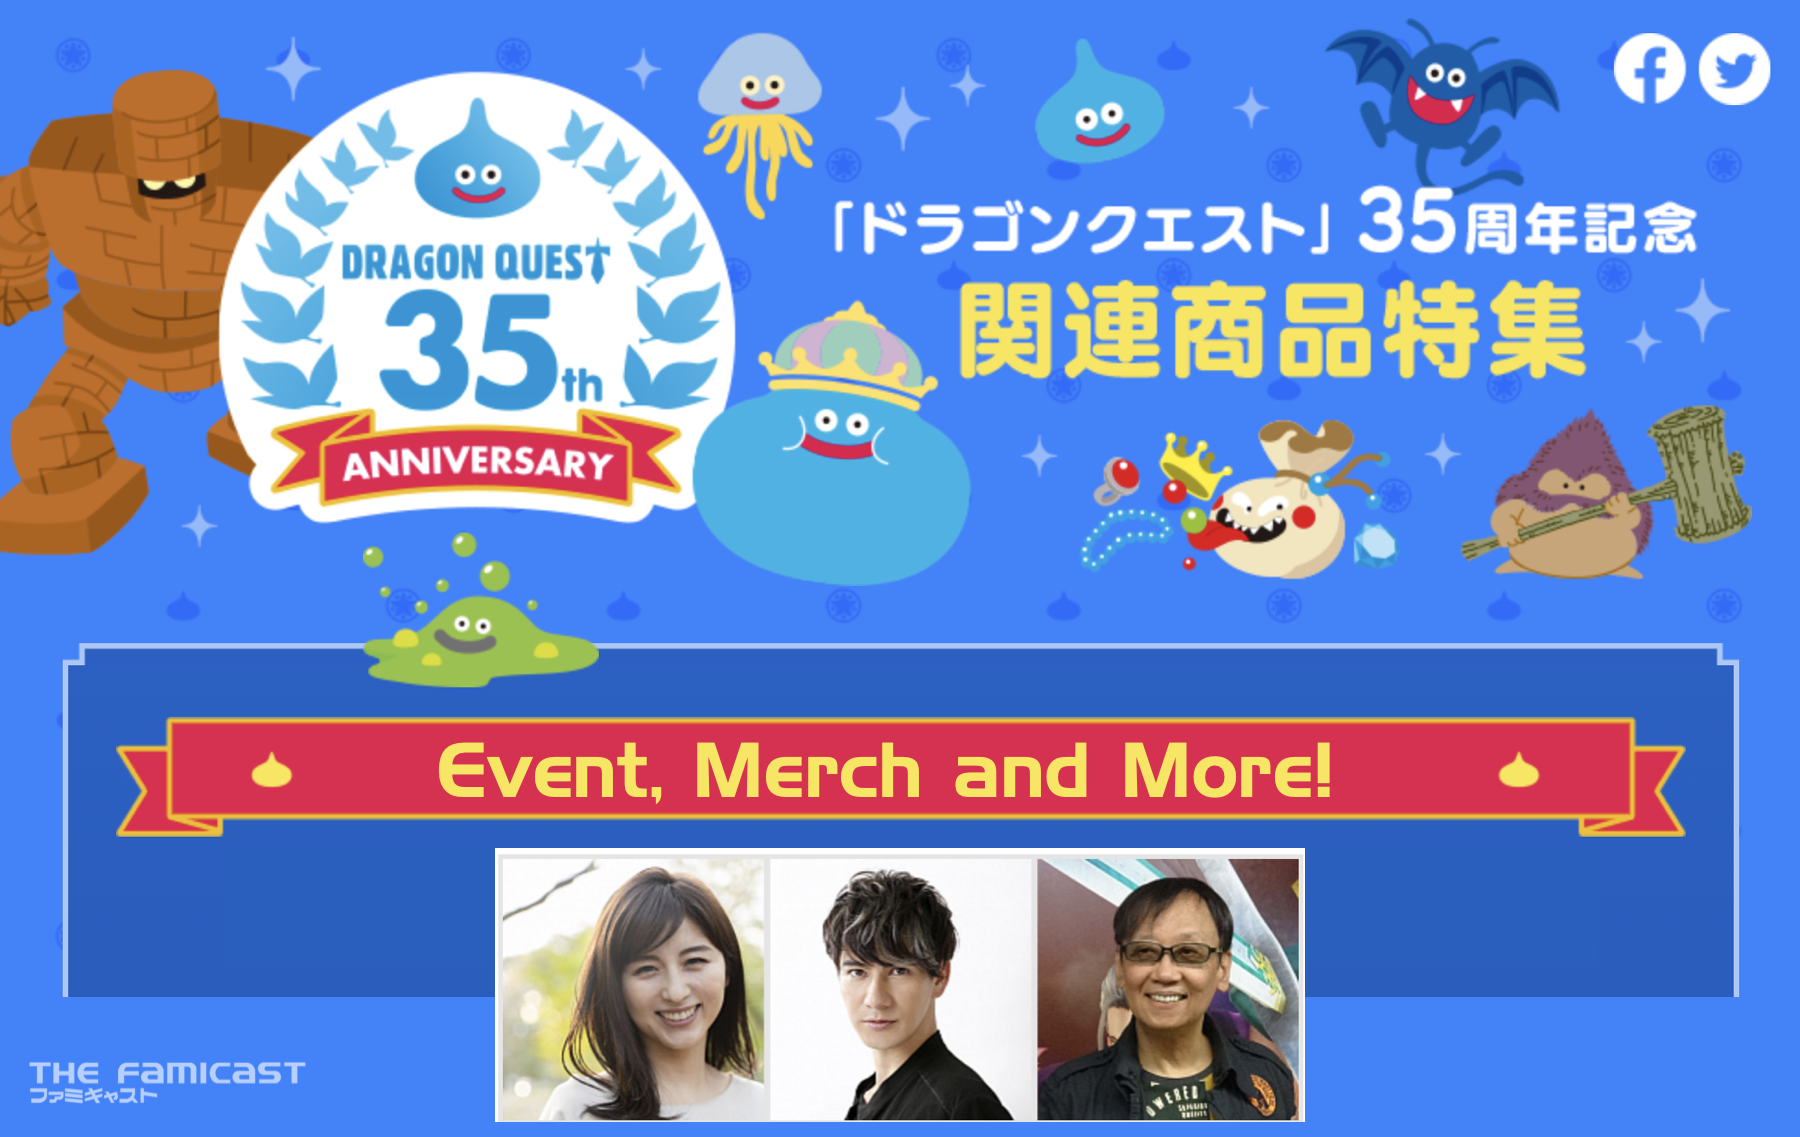 Dragon Quest 35th Anniversary Event, Special Goods Announced